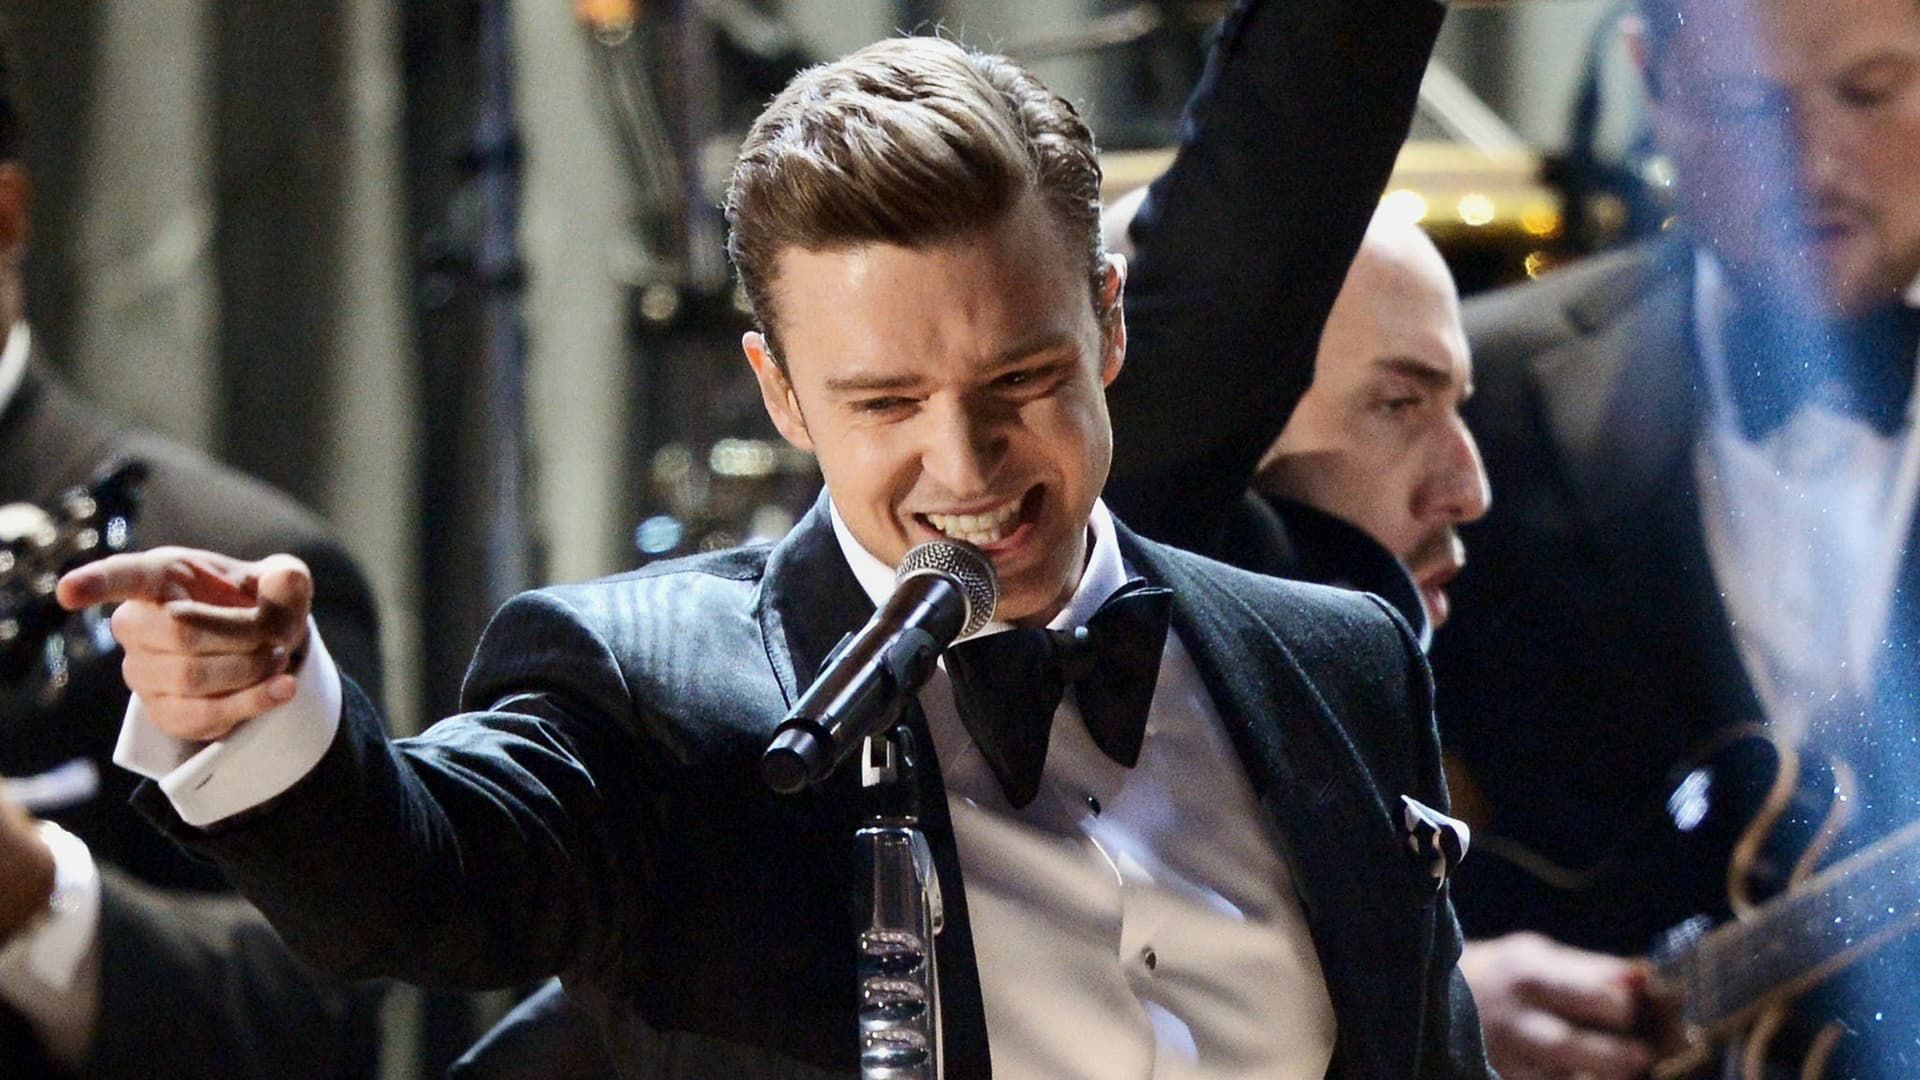 Justin Timberlake: Suited Up background